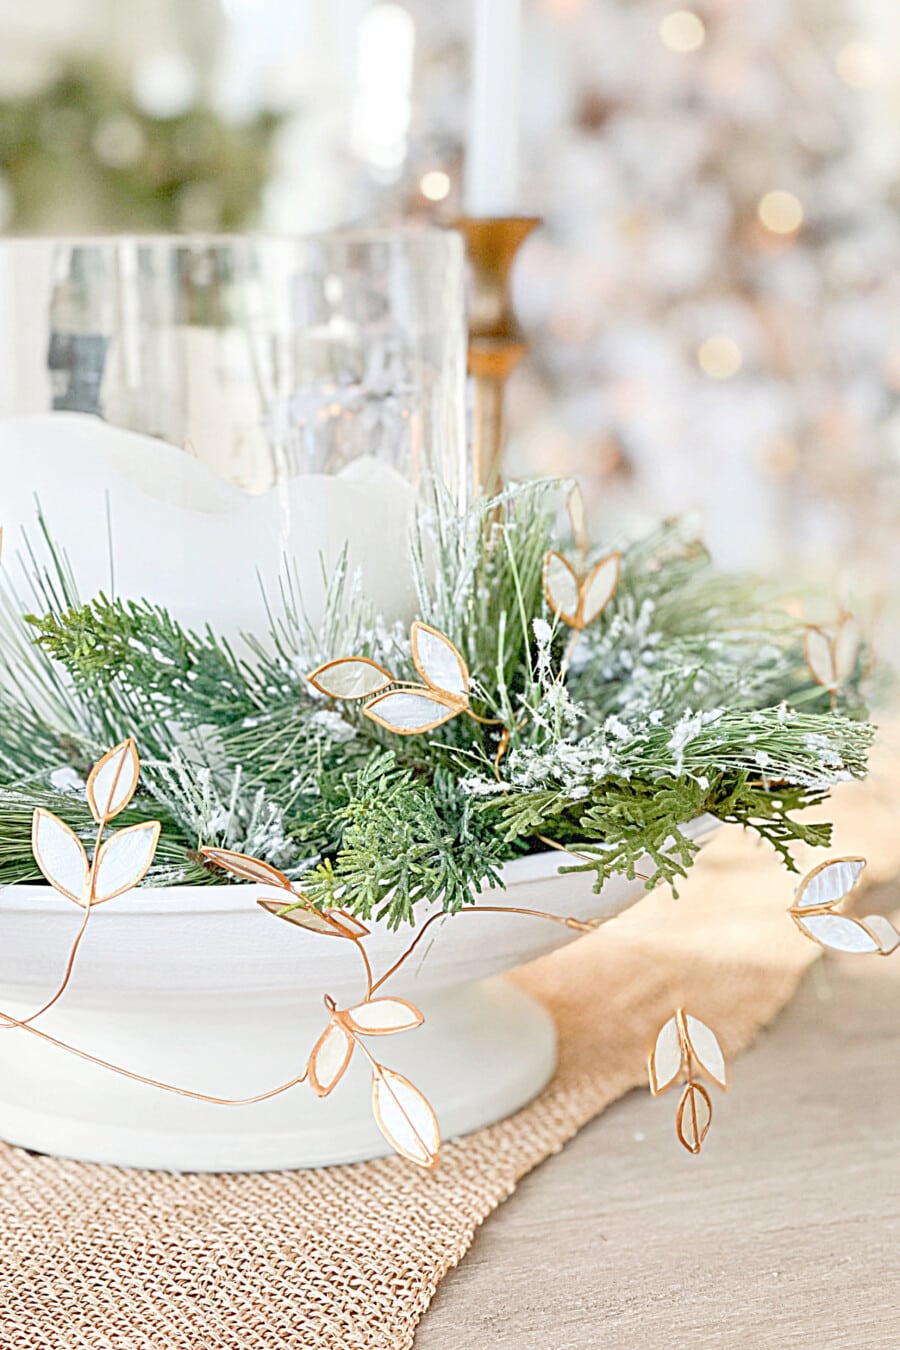 Christmas 2022 Decorating Trends